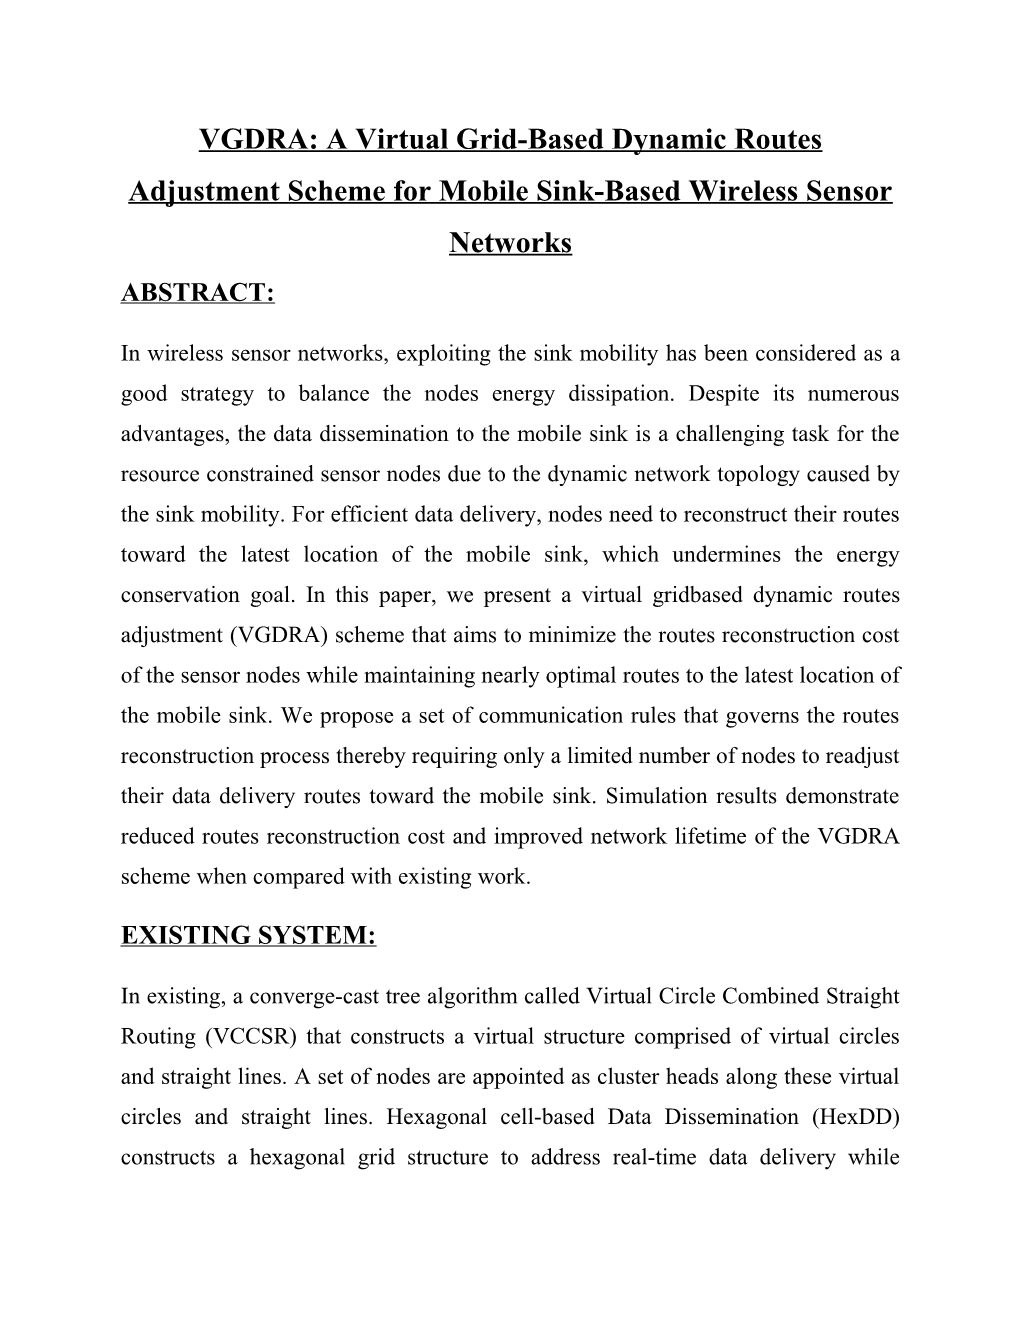 VGDRA: a Virtual Grid-Based Dynamic Routes Adjustment Scheme for Mobile Sink-Based Wireless